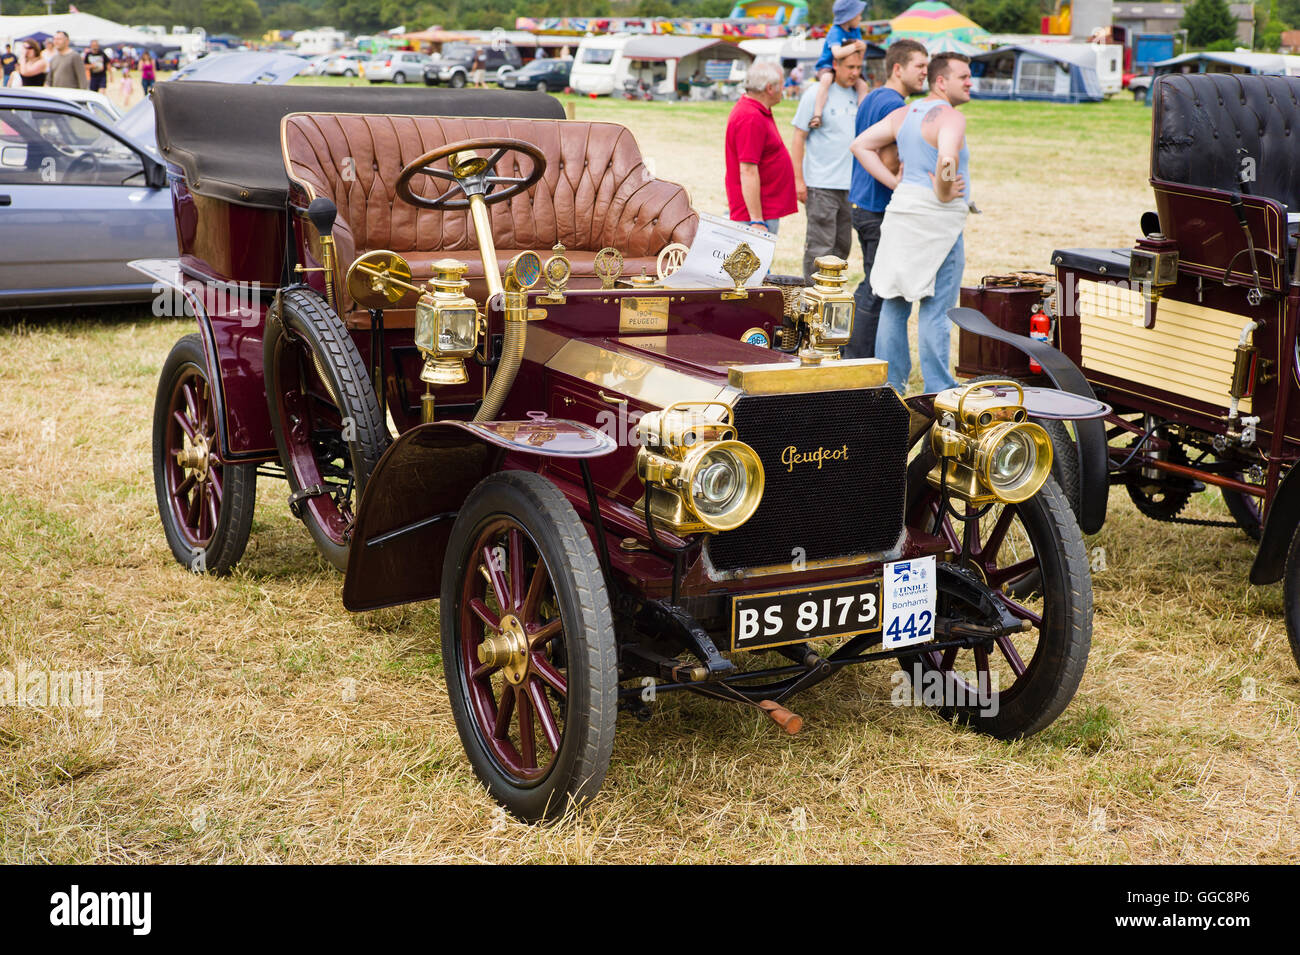 An old Peugeot automobile from early 20th century Stock Photo